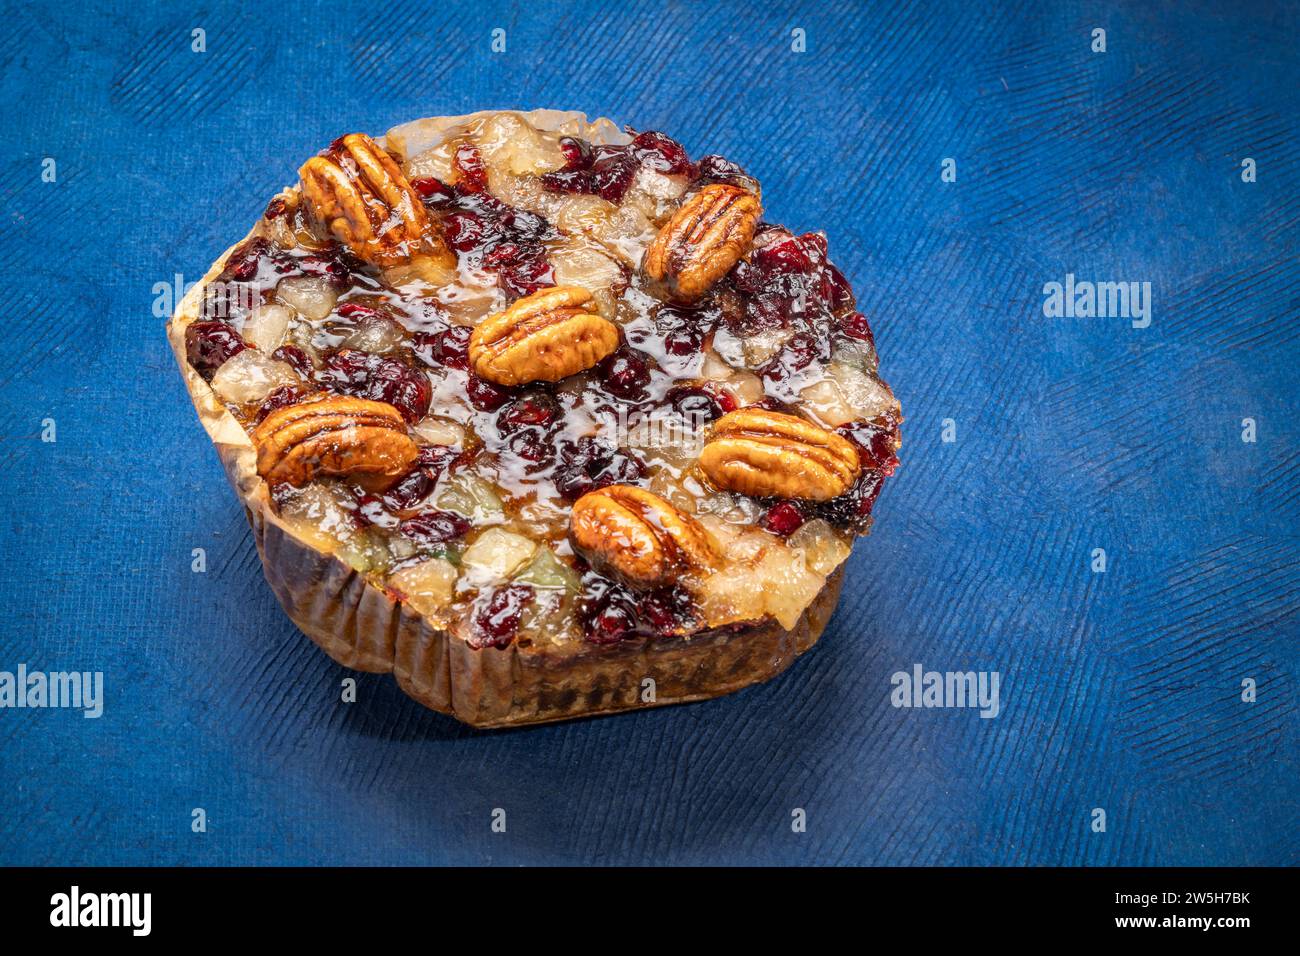 holiday rum cake with pecans, pineapple, dried cherries and cranberries against blue art paper Stock Photo